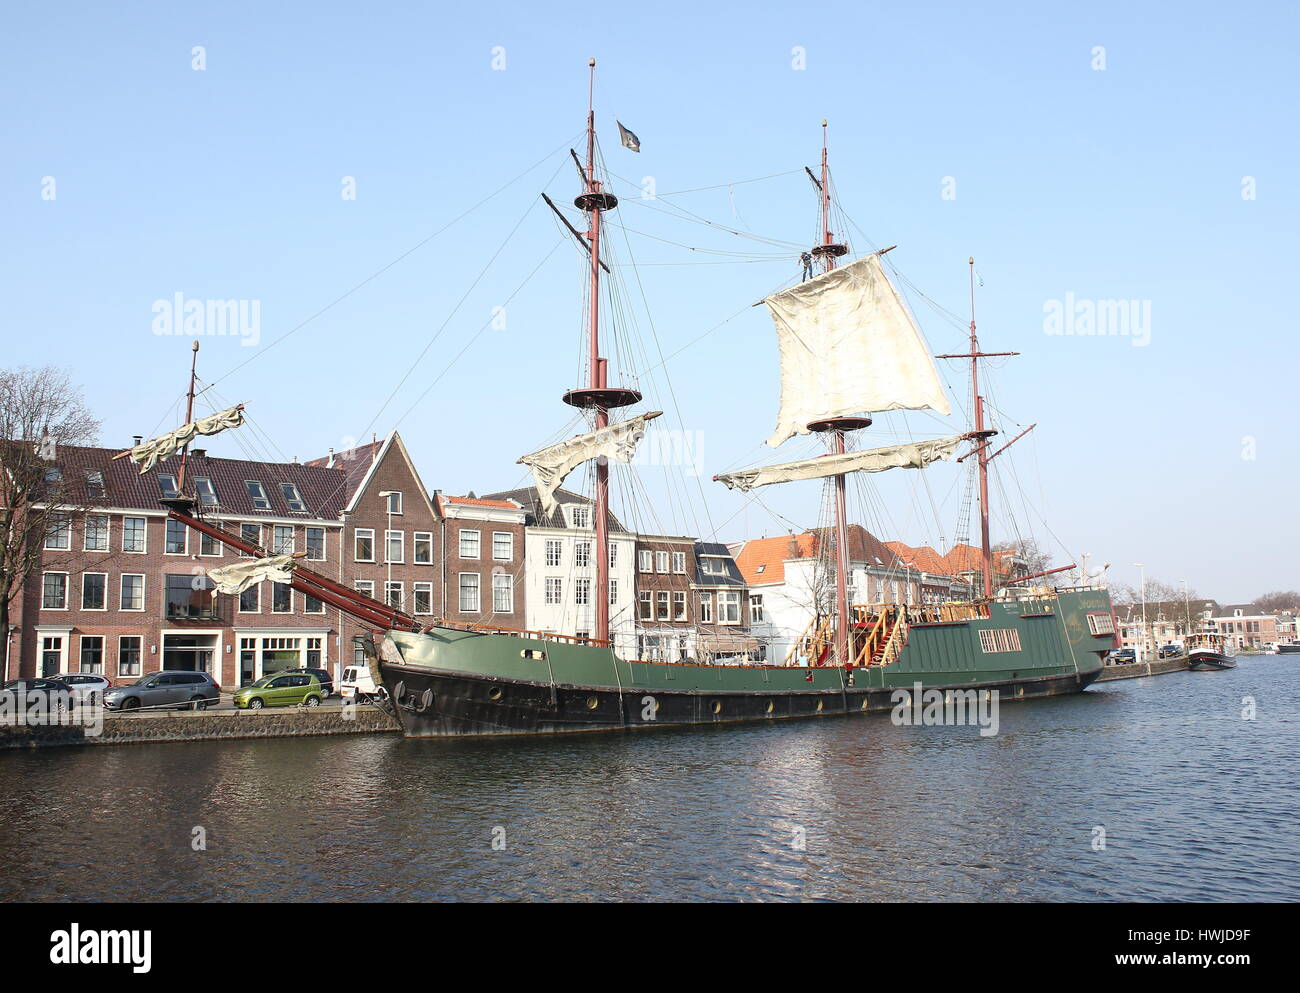 Historic replica sailing ship Soeverein (2005, loosely based on an East Indiaman VOC ship) moored along Spaarne river in central Haarlem, Netherlands Stock Photo